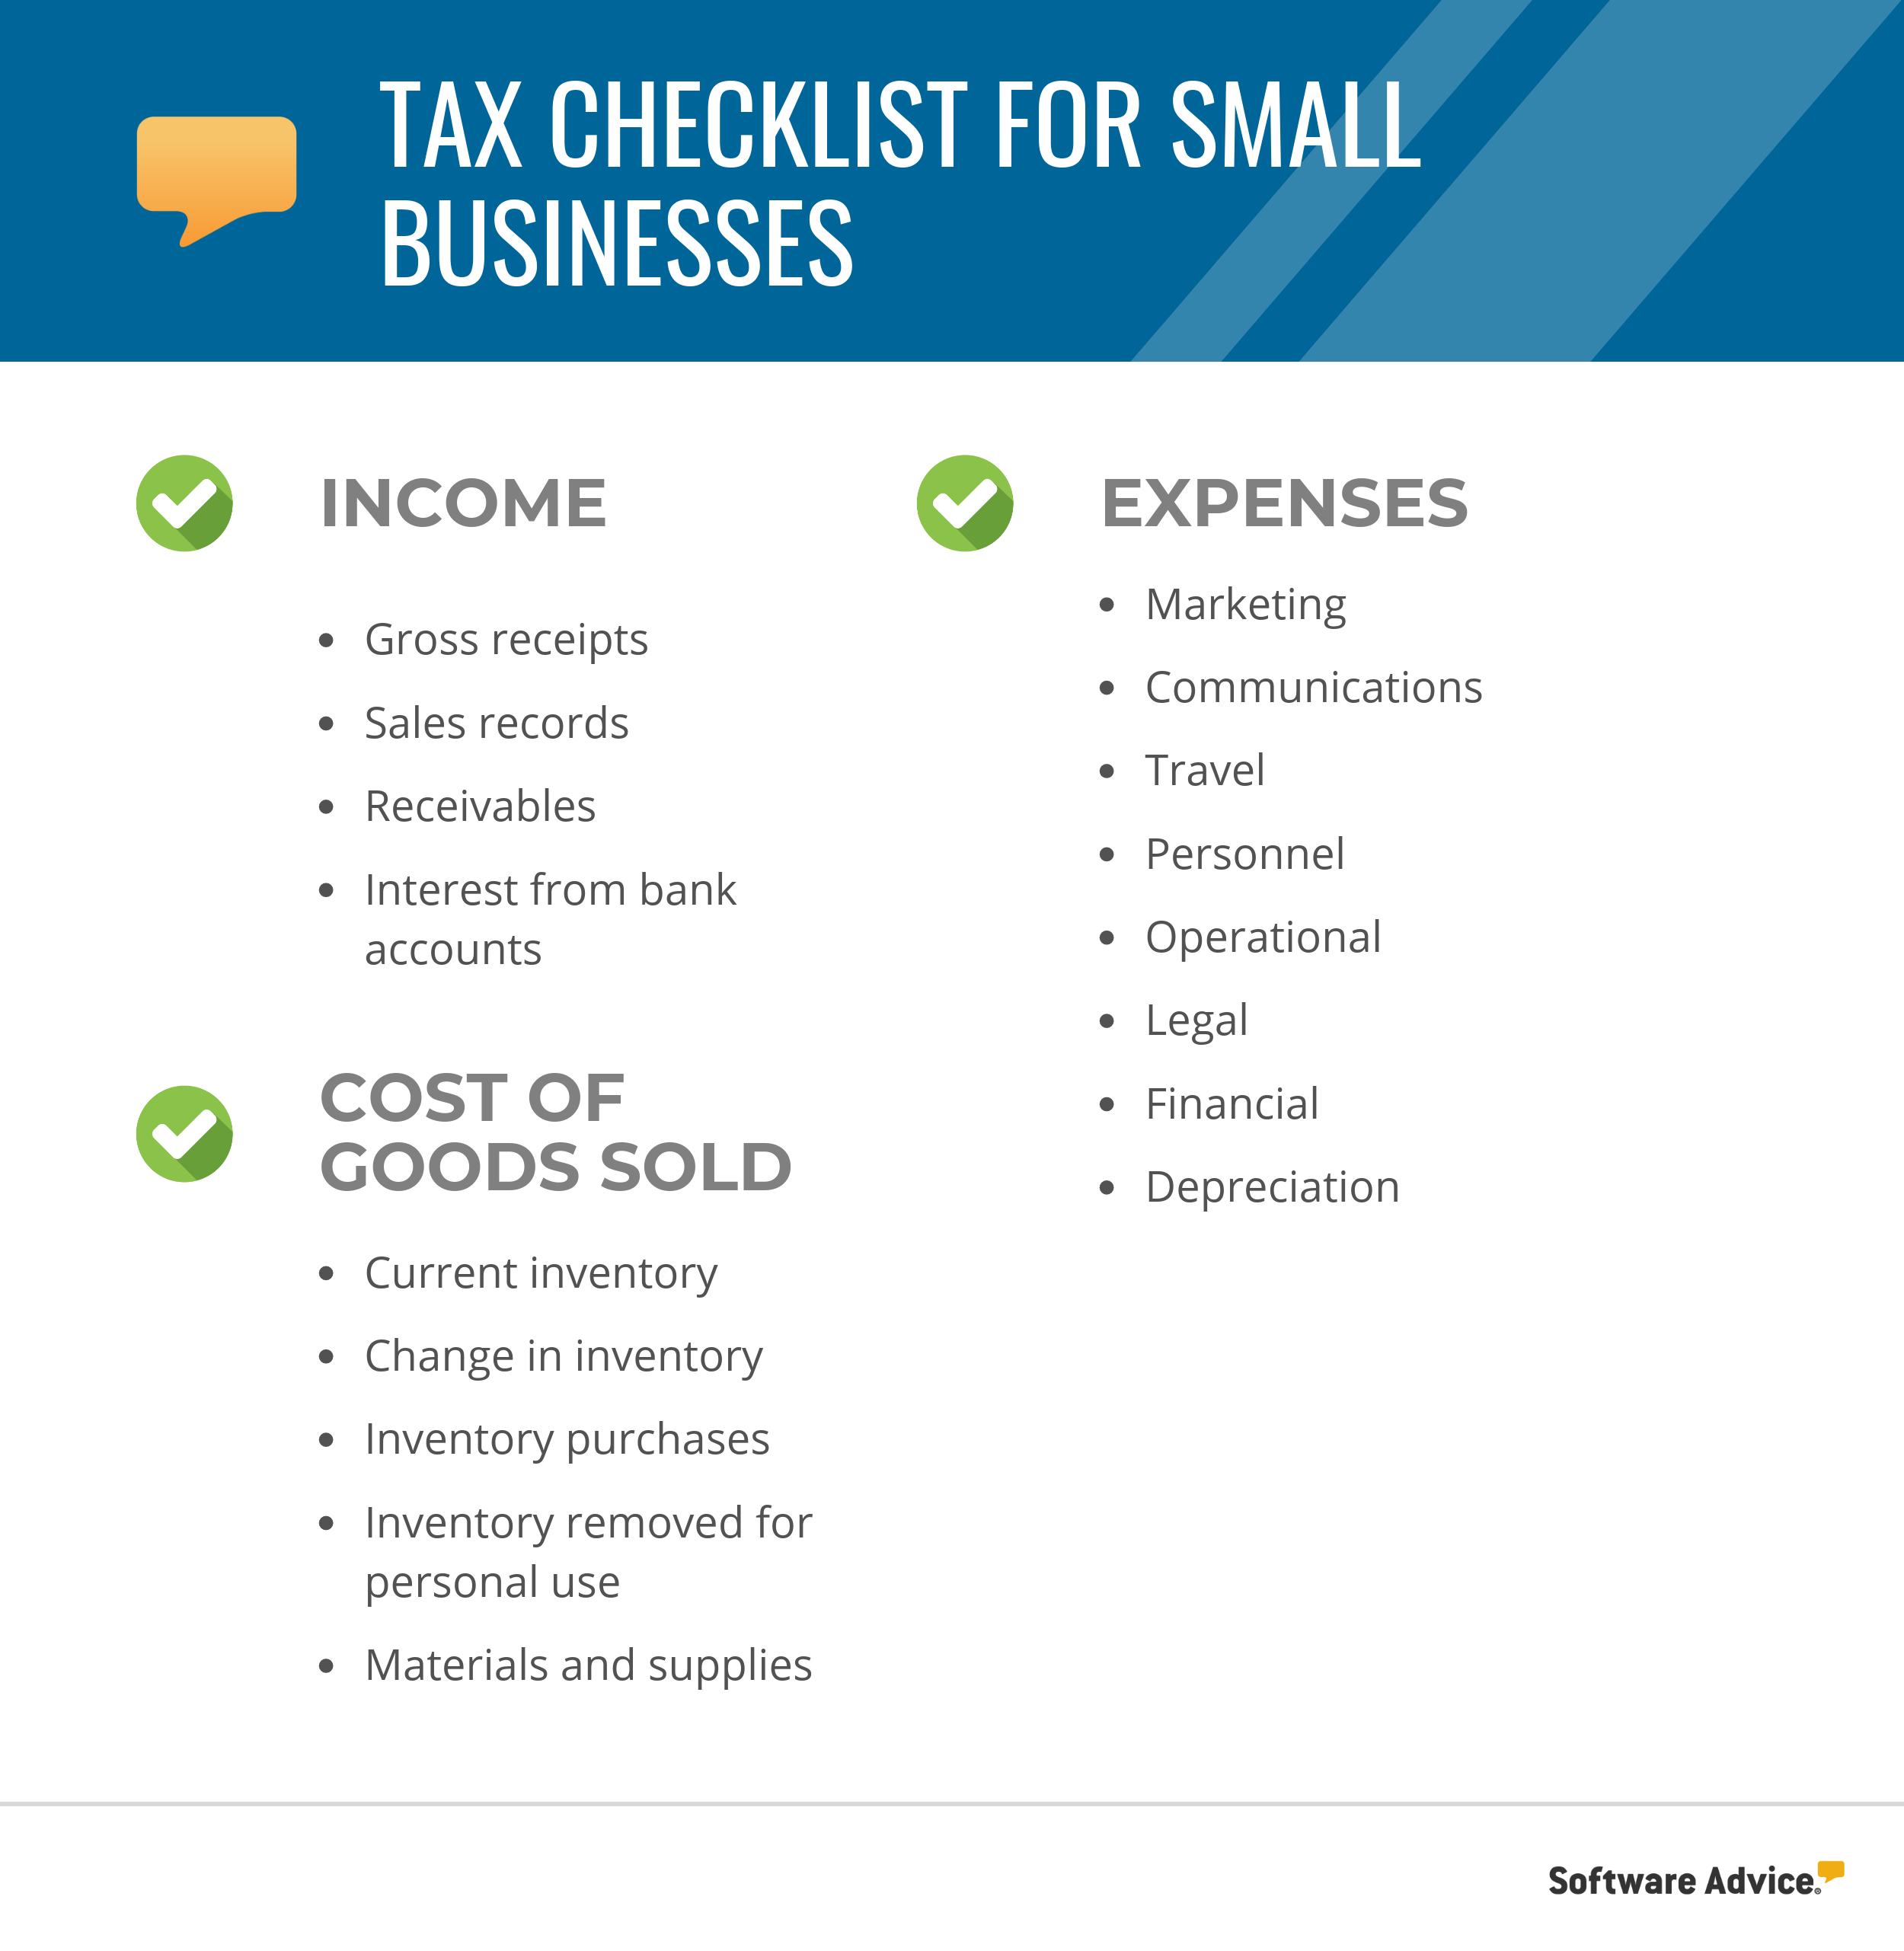 Master Your Taxes With This Checklist for Small Businesses